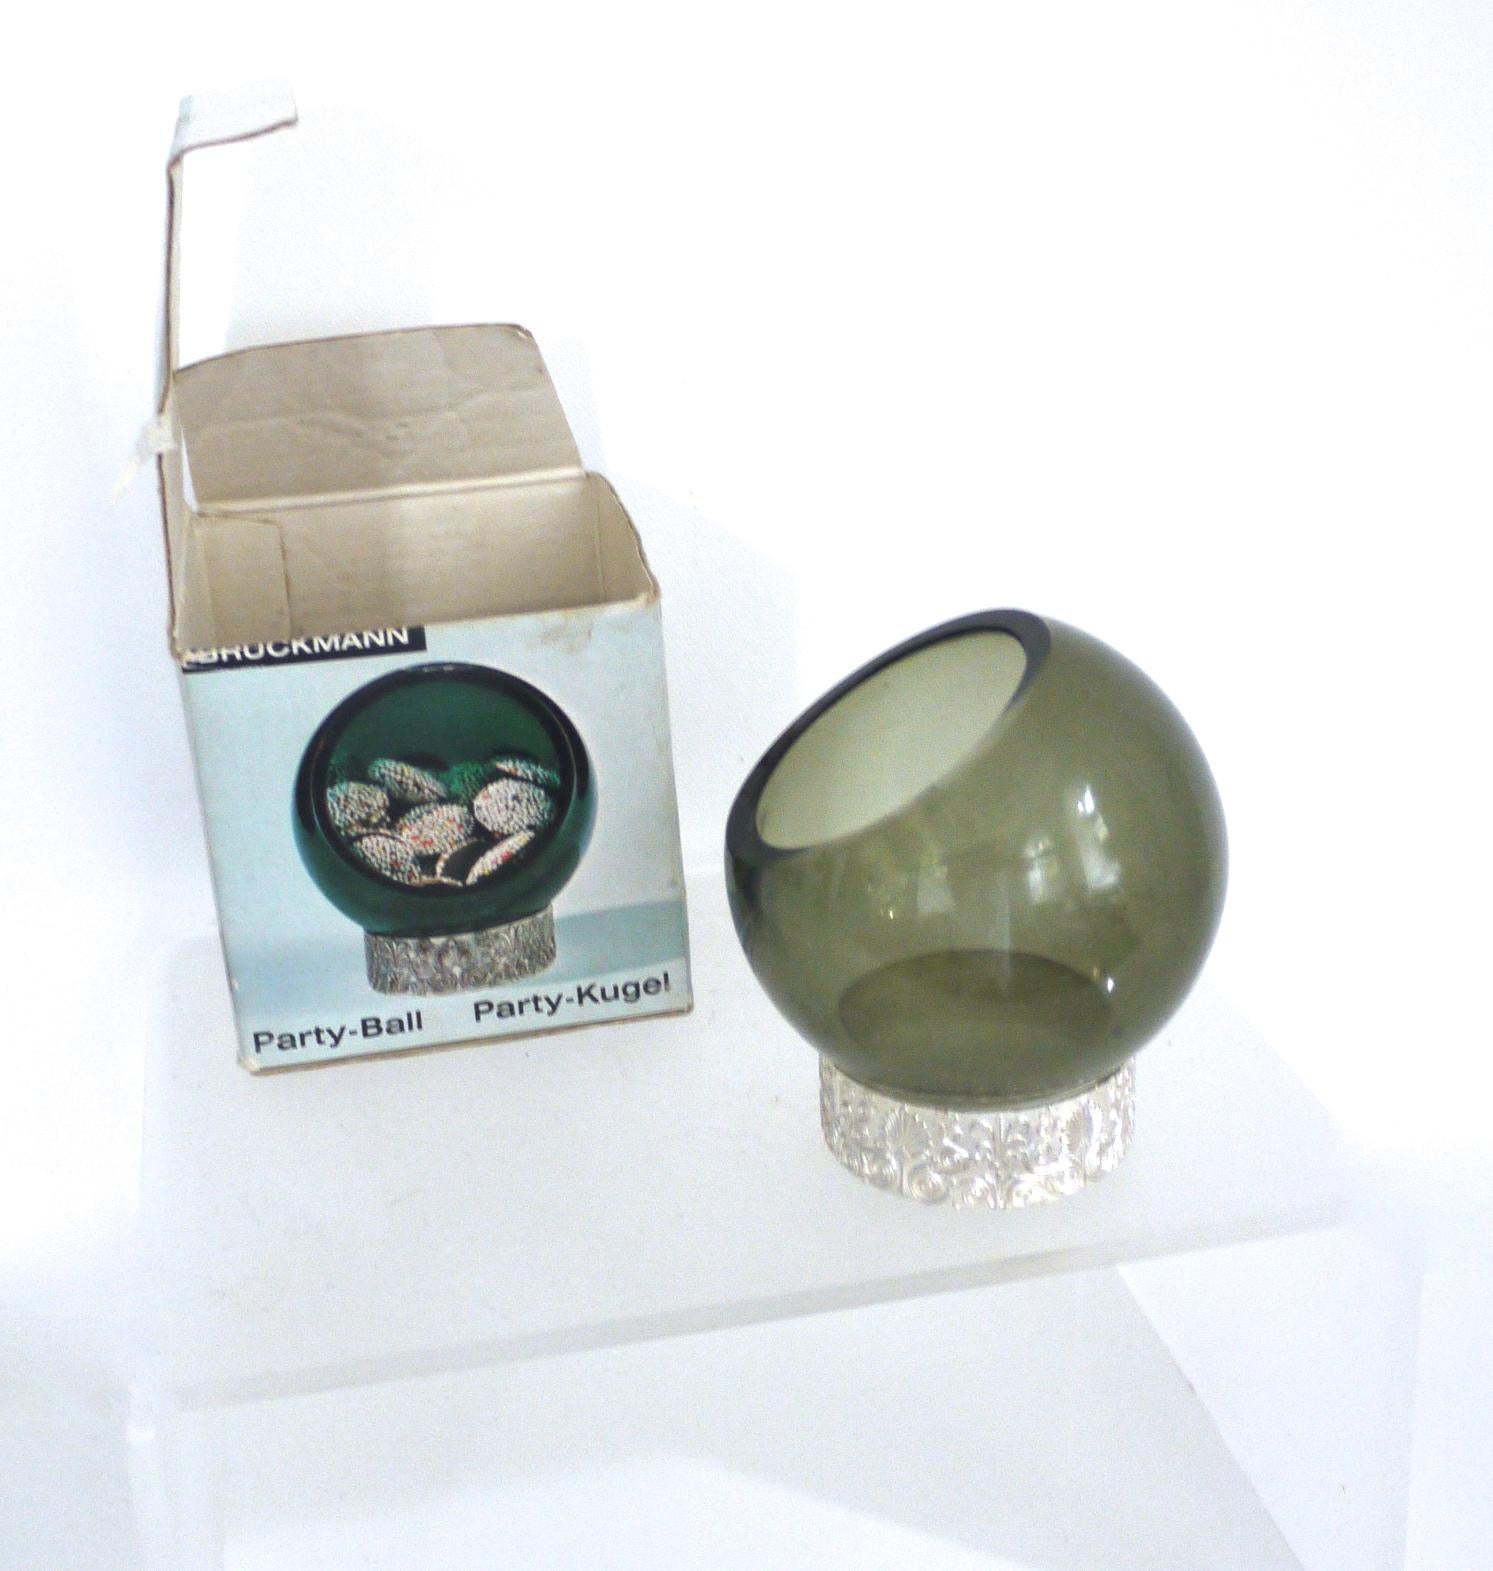 Scandinavian smoked glass Party Kugel for sweets or cigarettes new in box 1960s. Party Kugel means 'Party Ball' New in box. Made by Bruckmann

This piece is a perfect gift for Christmas - silver plated 'mount' with smoked sphere glass bowl (small